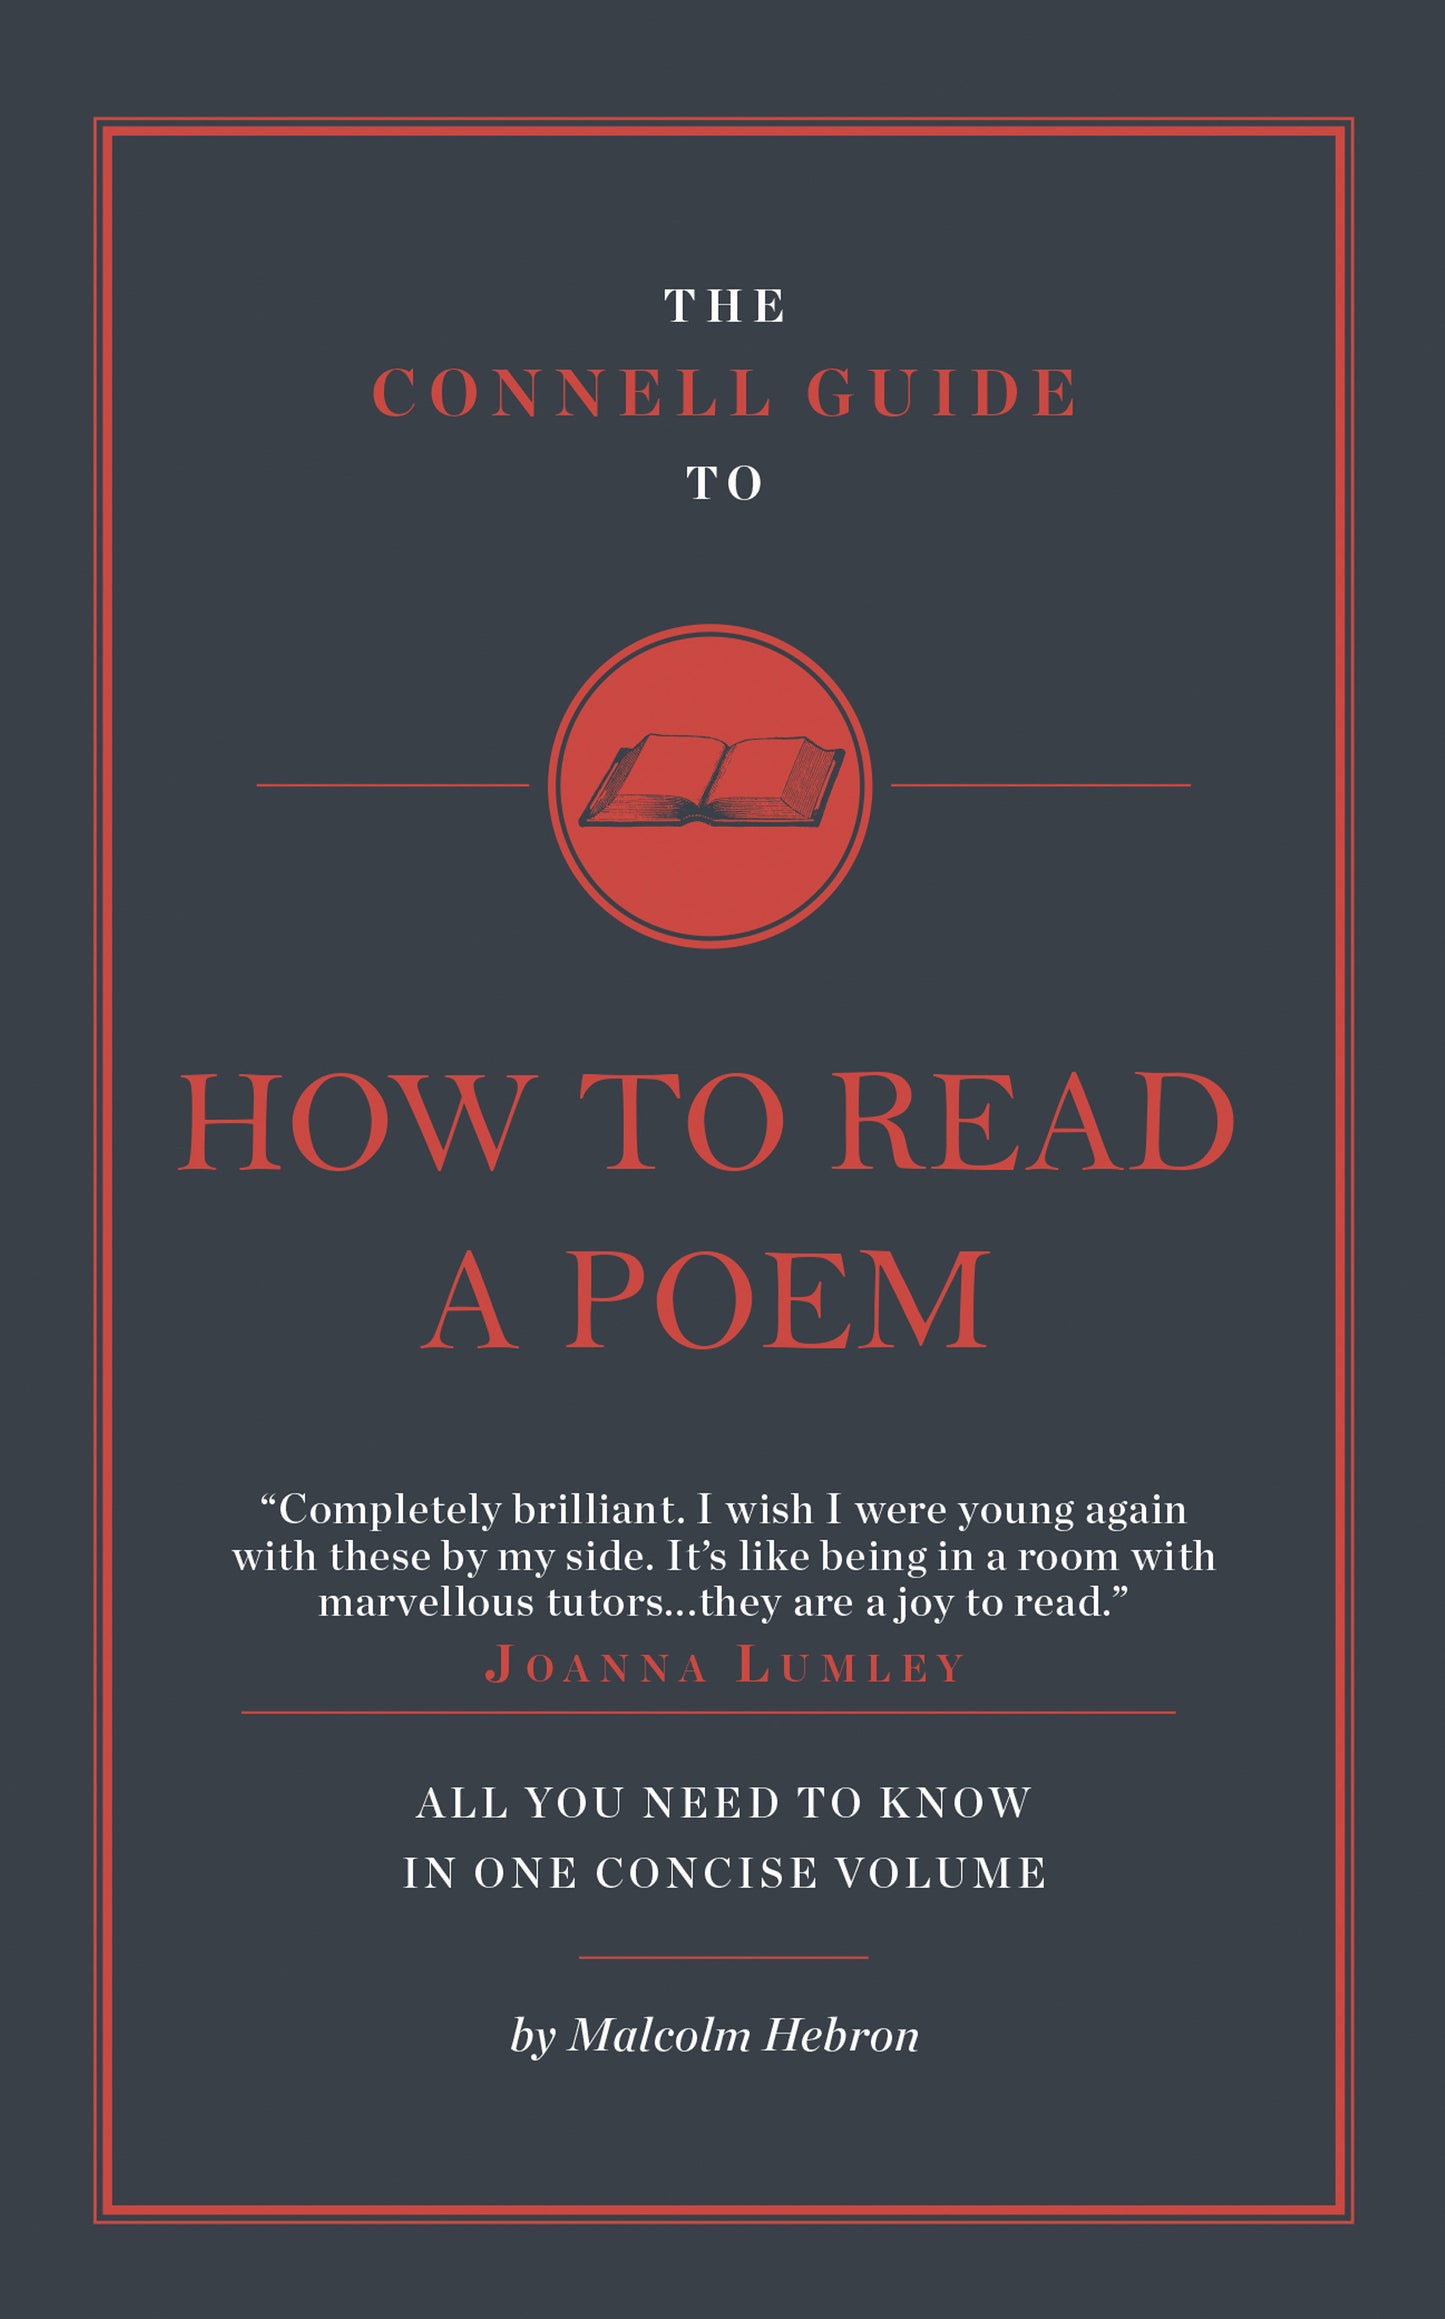 The Connell Guide to How to Read a Poem